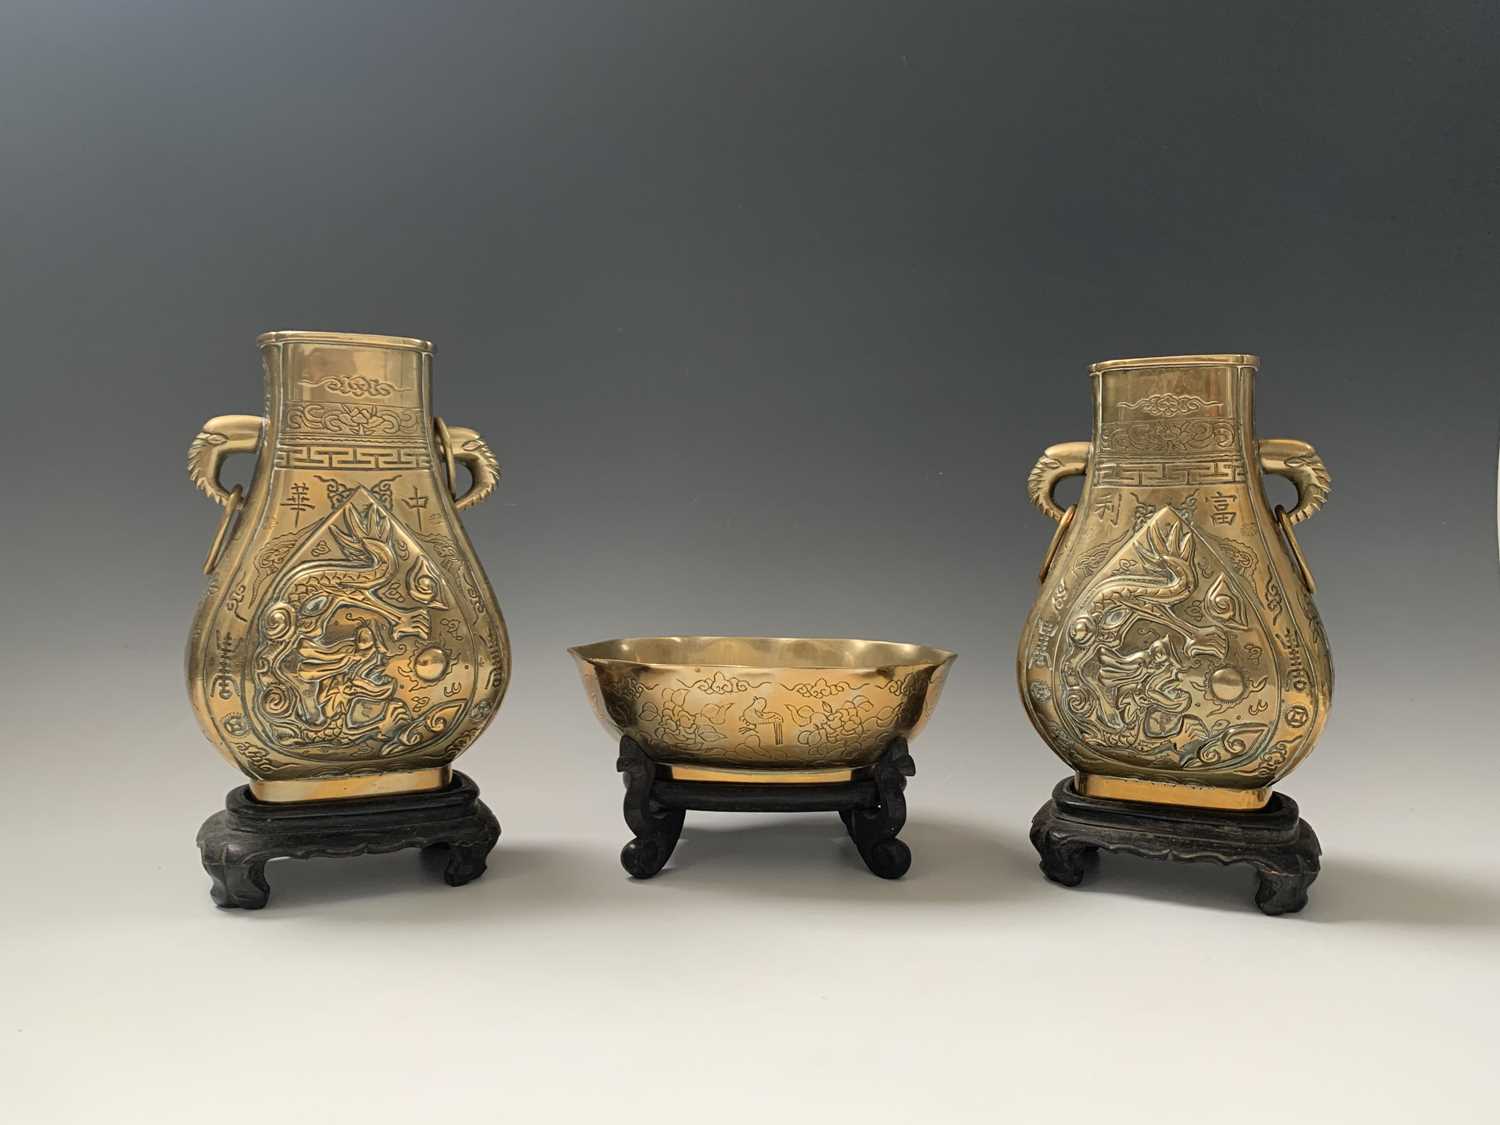 A pair of Chinese bronze pear-shaped vases, circa 1900, each with a dragon chasing the pearl to - Image 10 of 10